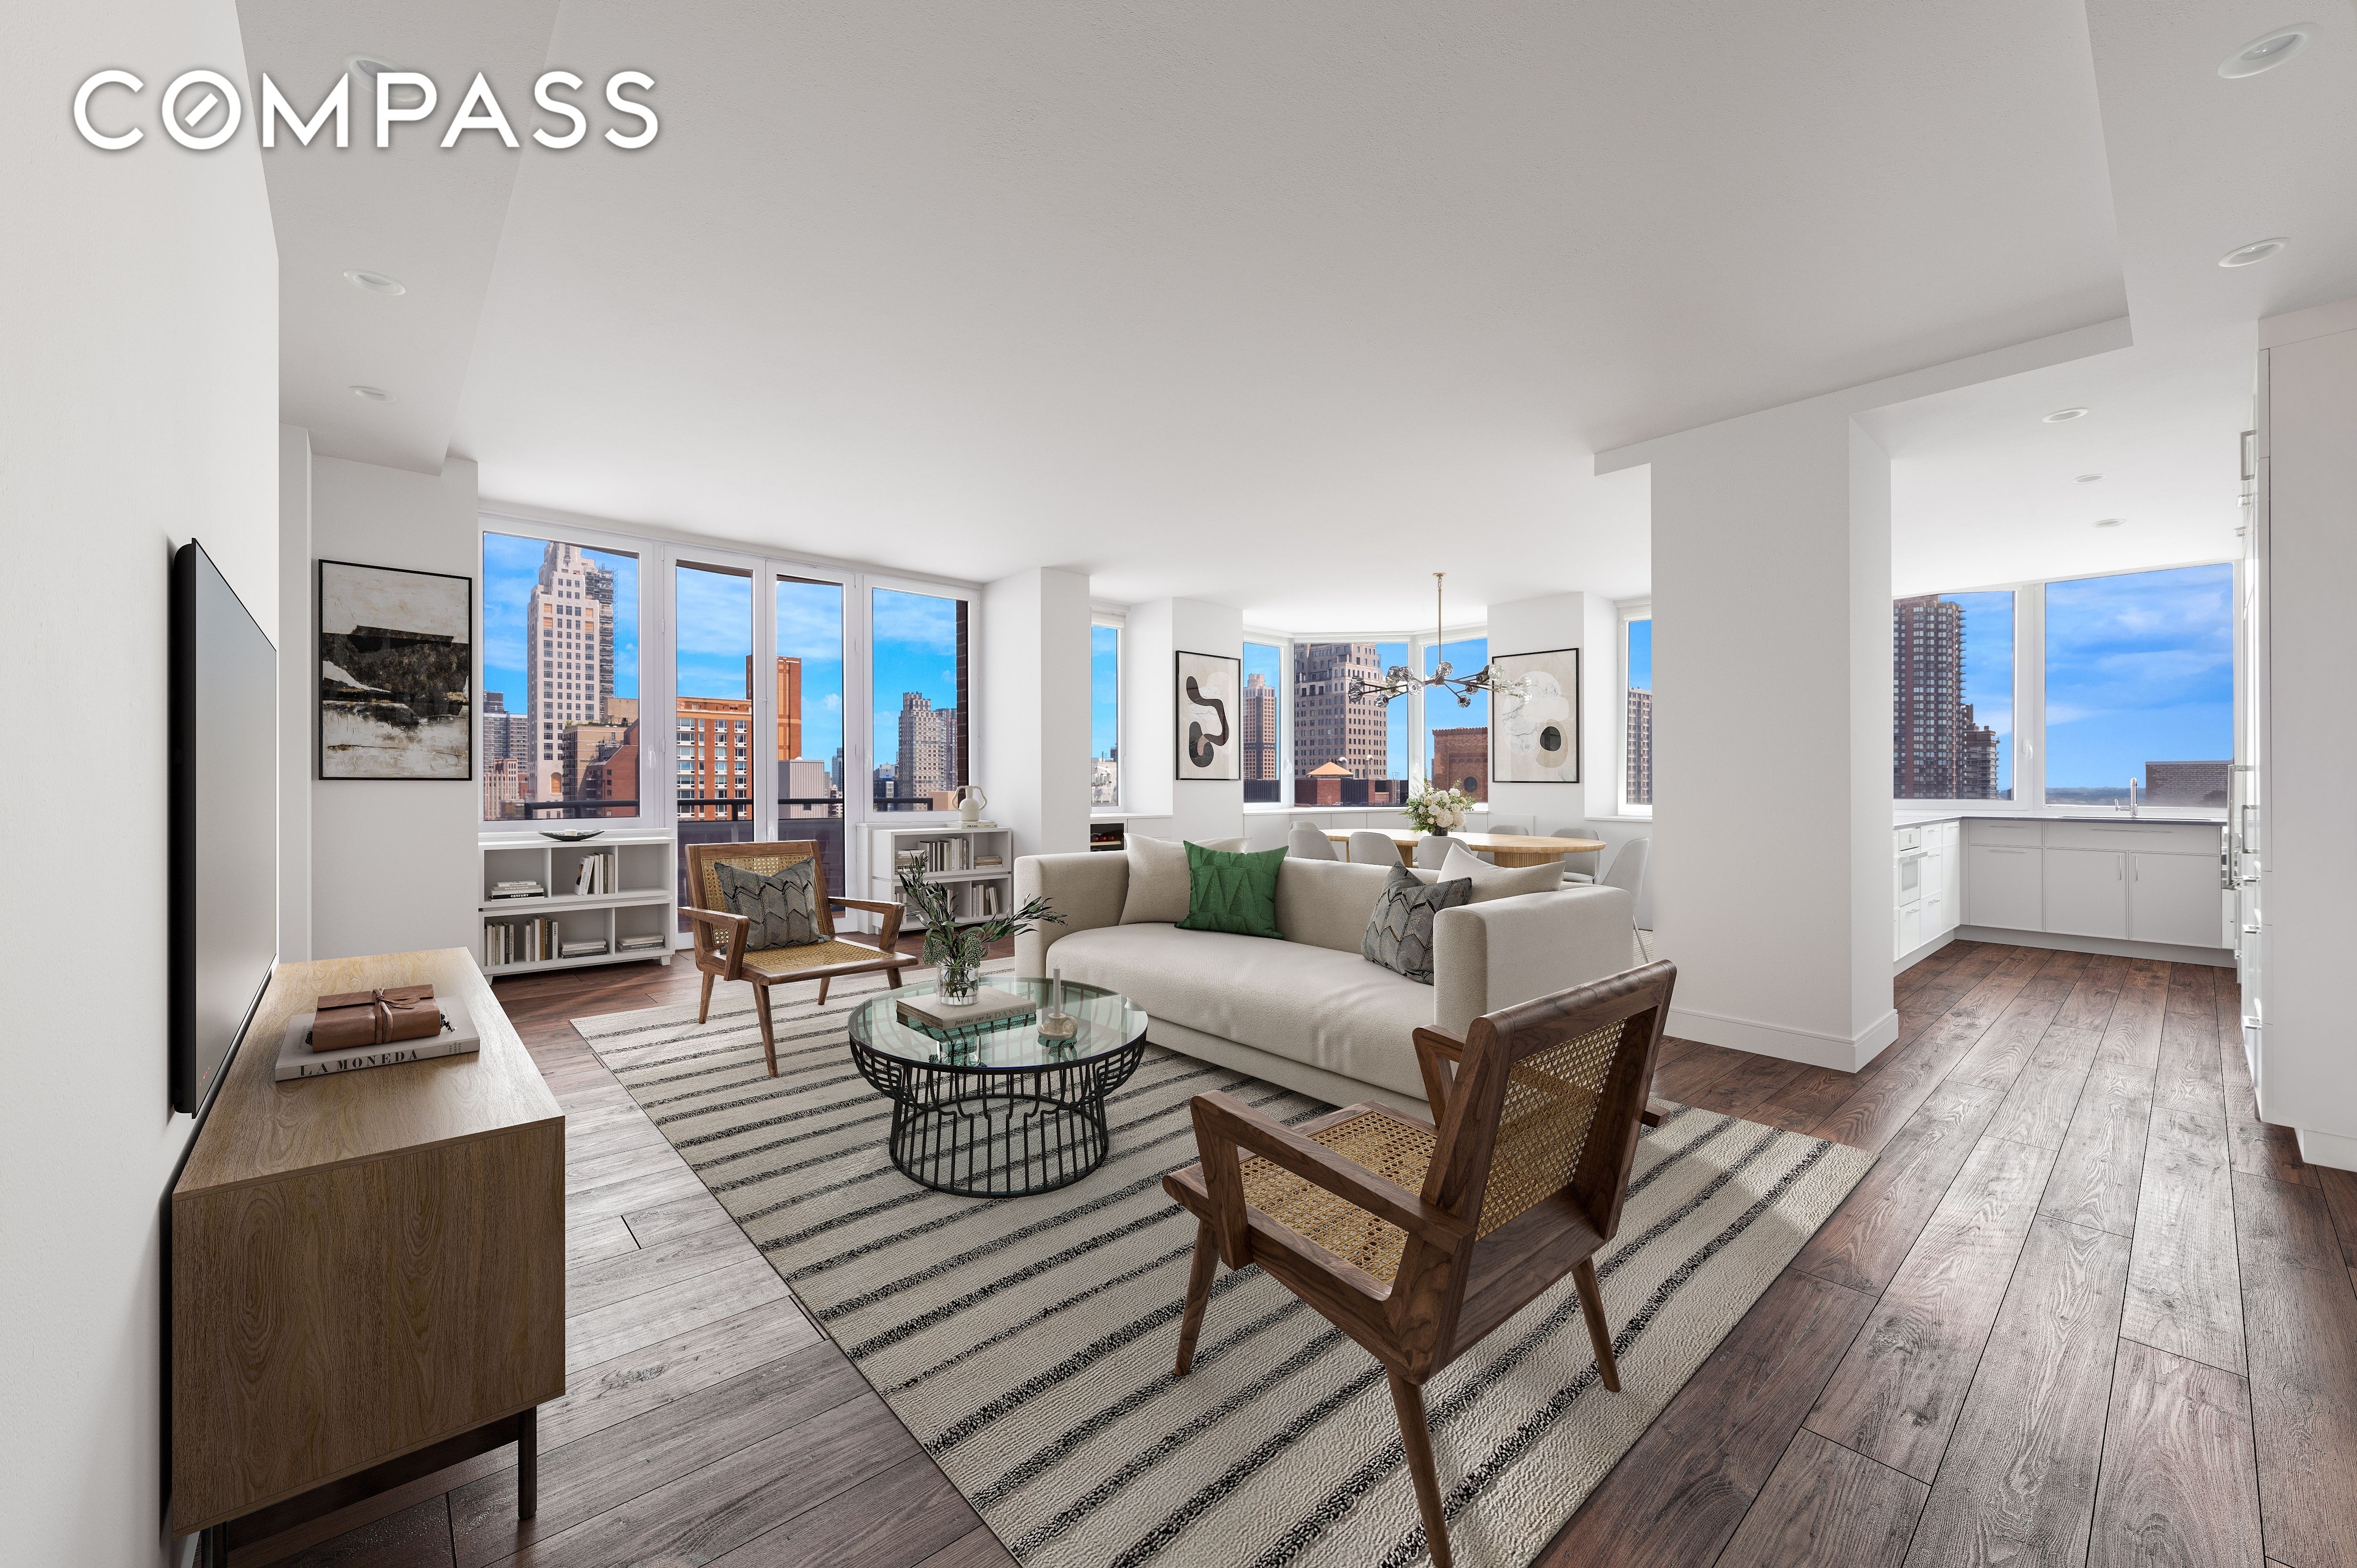 Condominium for Sale at The Empire, 188 E 78TH ST, 23B Upper East Side, New York, New York 10075